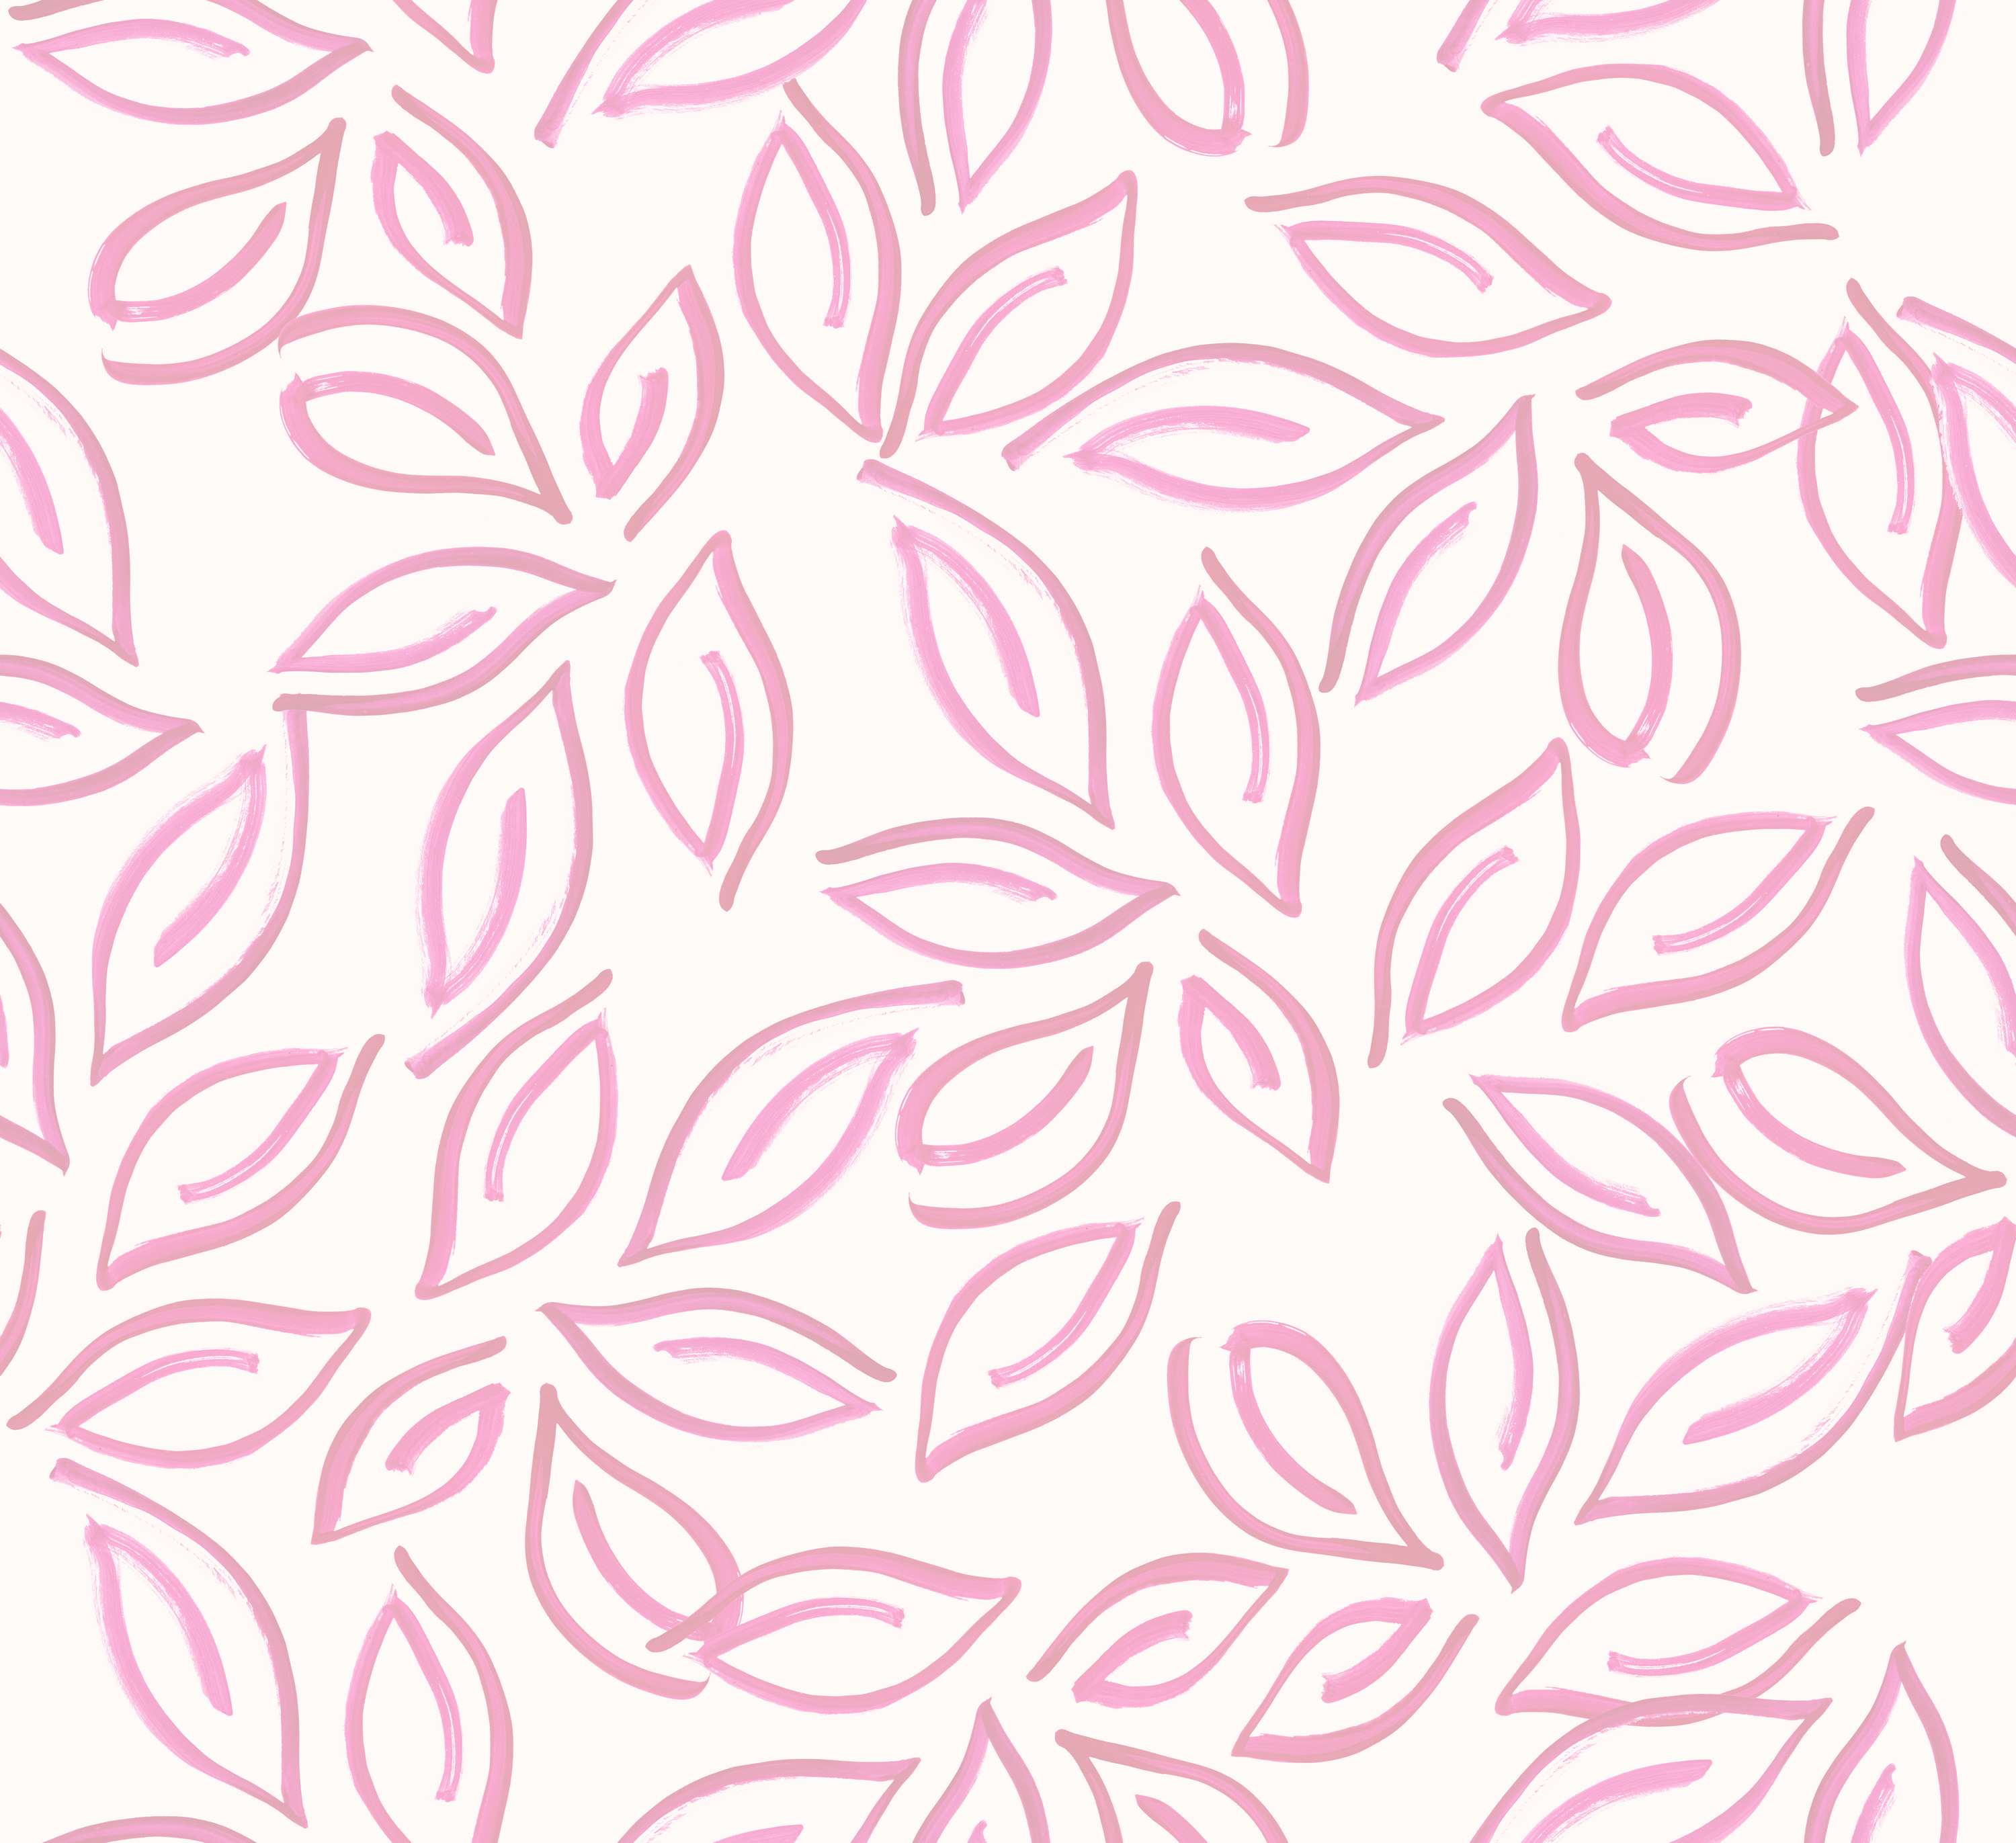 Samoa Leaves (pink)-Wallpaper.com & photo wallpaper by renowned designers. Design your own photo wallpaper in our wallpaper online store. High quality design wallpaper, trend and luxury wallpaper for